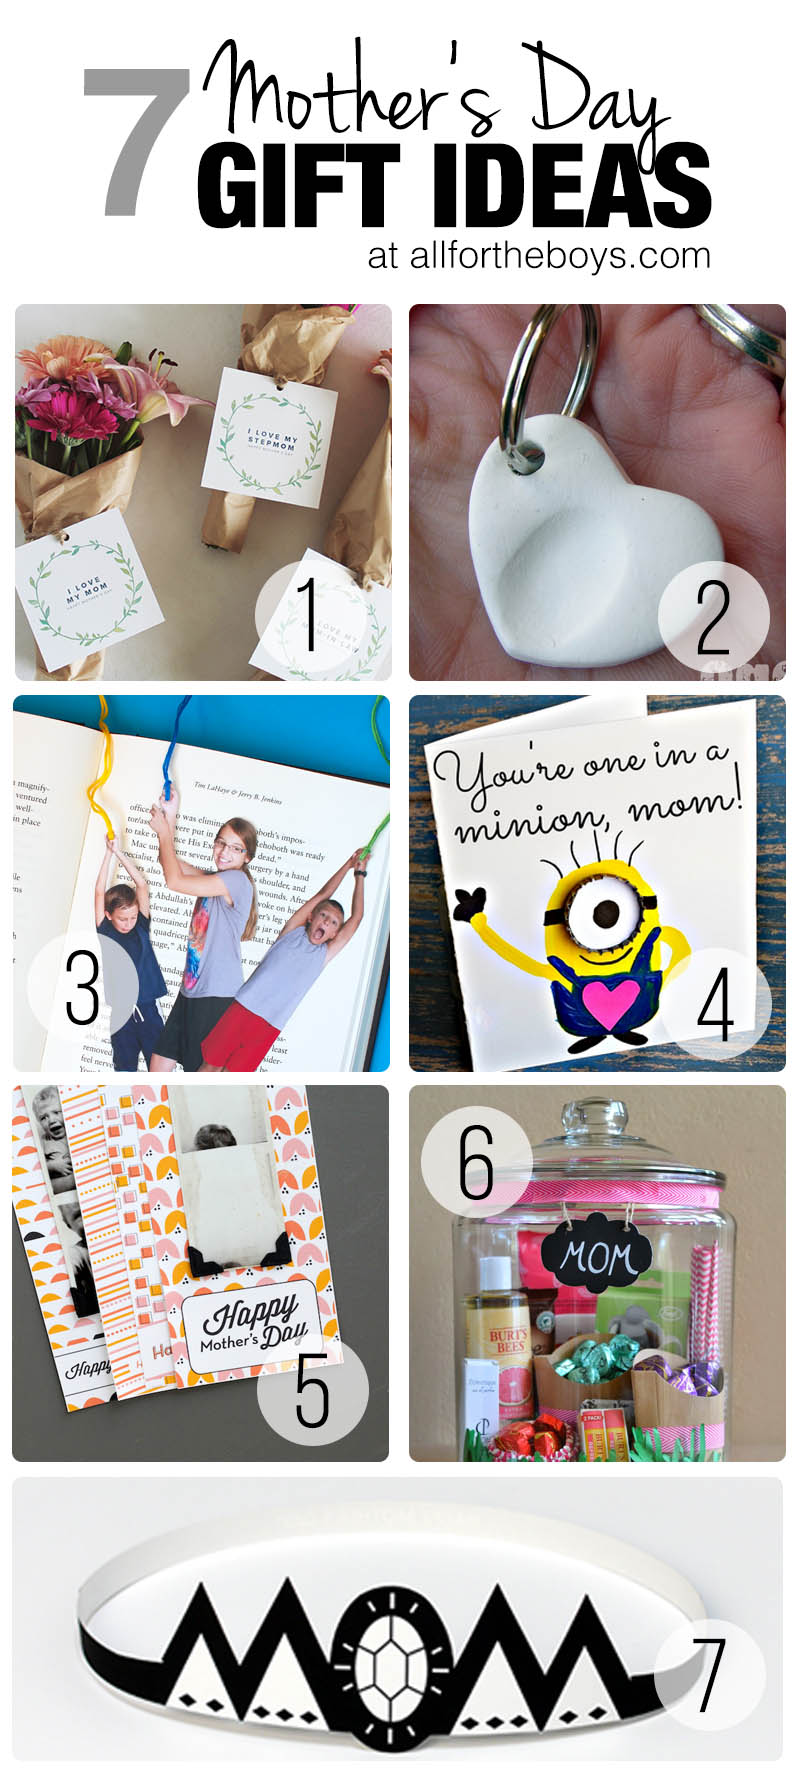 5 Easy DIY Gift Ideas You Can Make Today! - Thrift Diving Blog